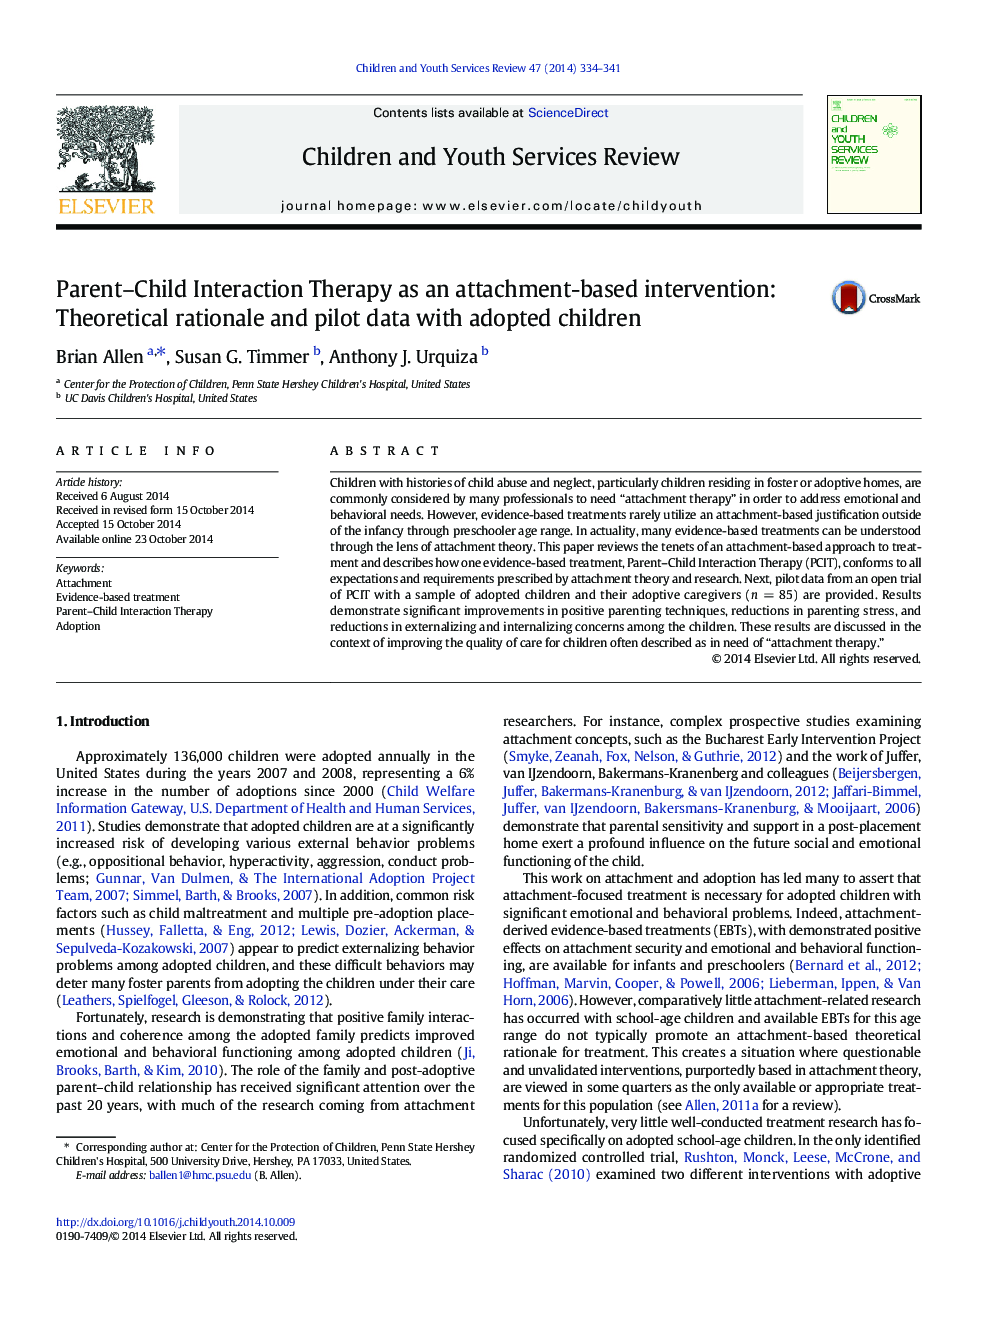 Parent-Child Interaction Therapy as an attachment-based intervention: Theoretical rationale and pilot data with adopted children